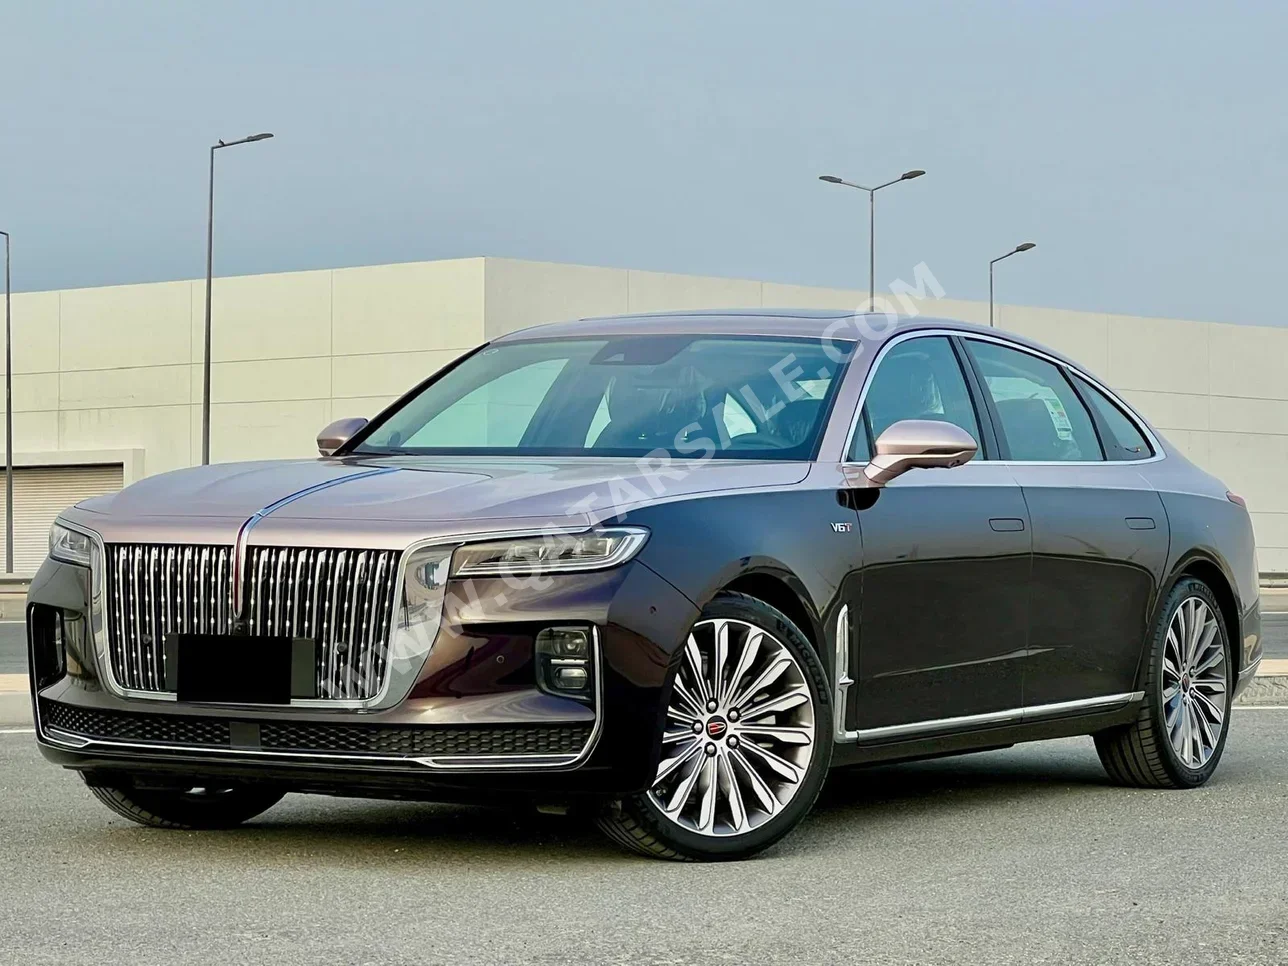 Hongqi  H9  2022  Automatic  0 Km  6 Cylinder  Front Wheel Drive (FWD)  Sedan  Gray  With Warranty